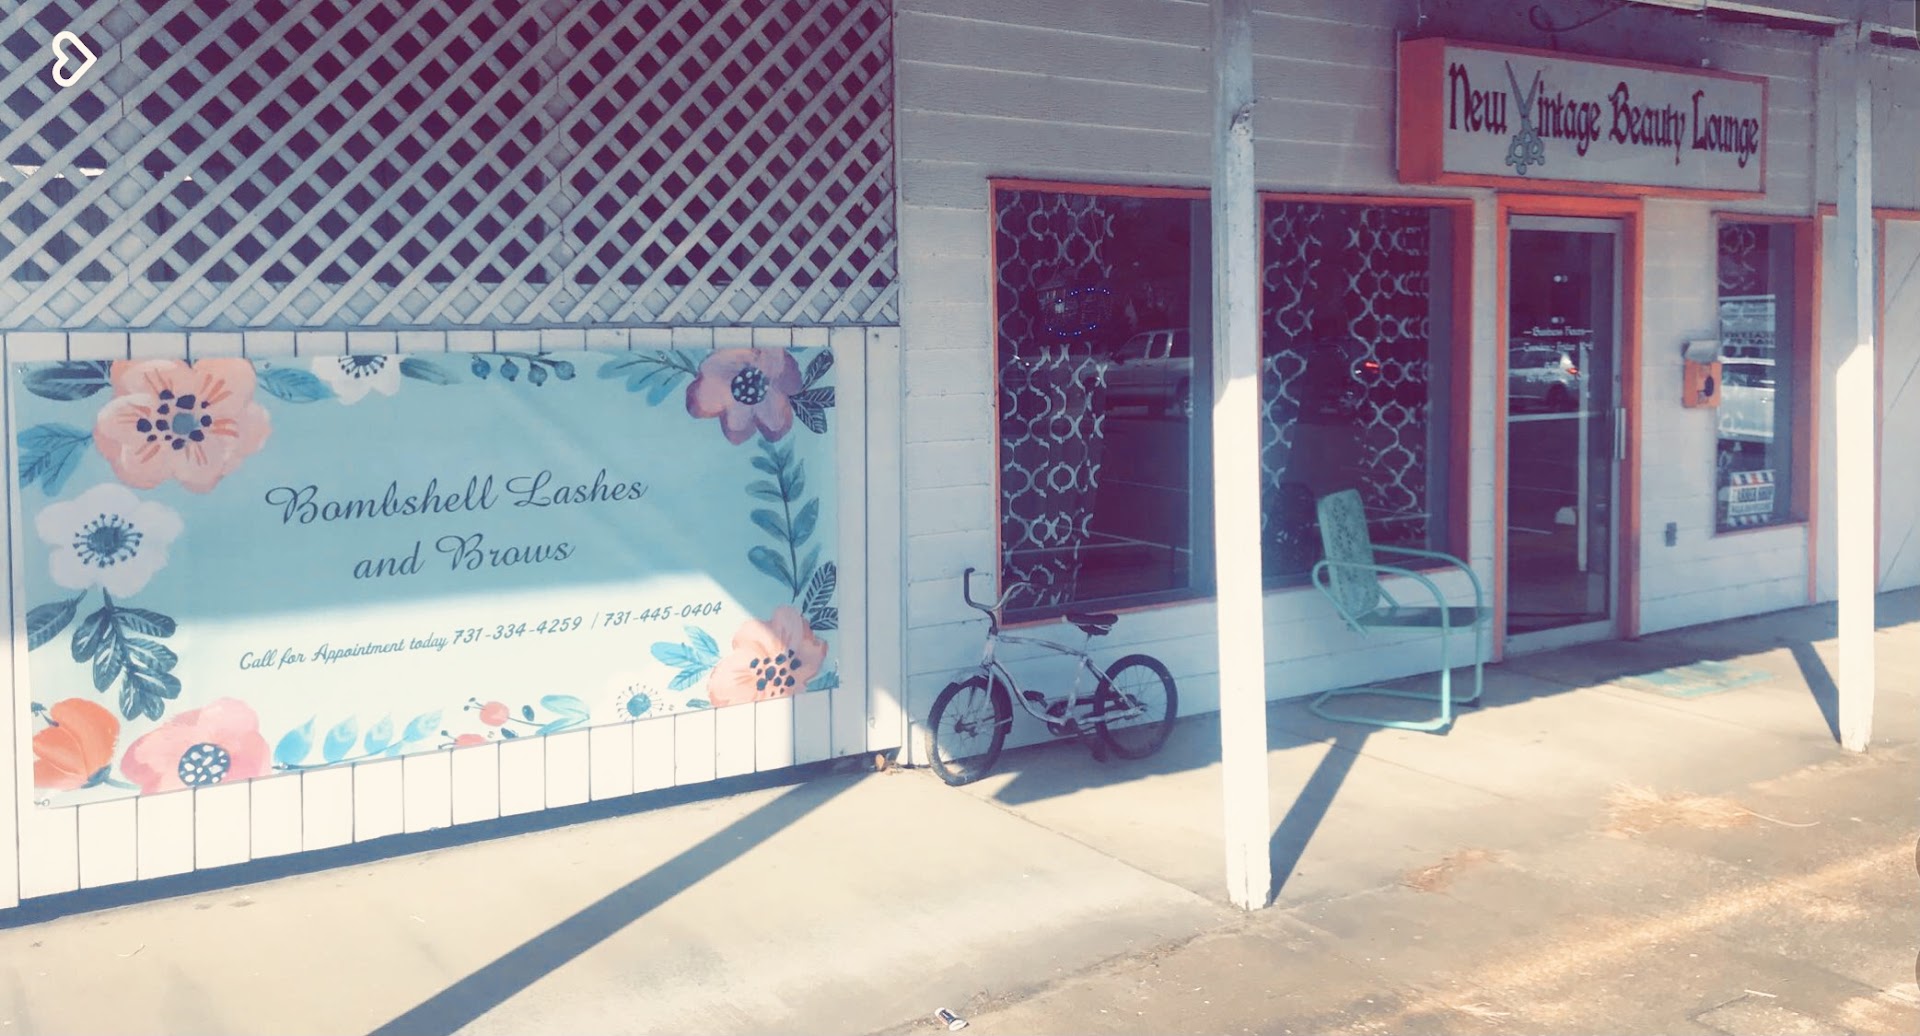 New Vintage Beauty Lounge/ Bombshell Lashes and Brows